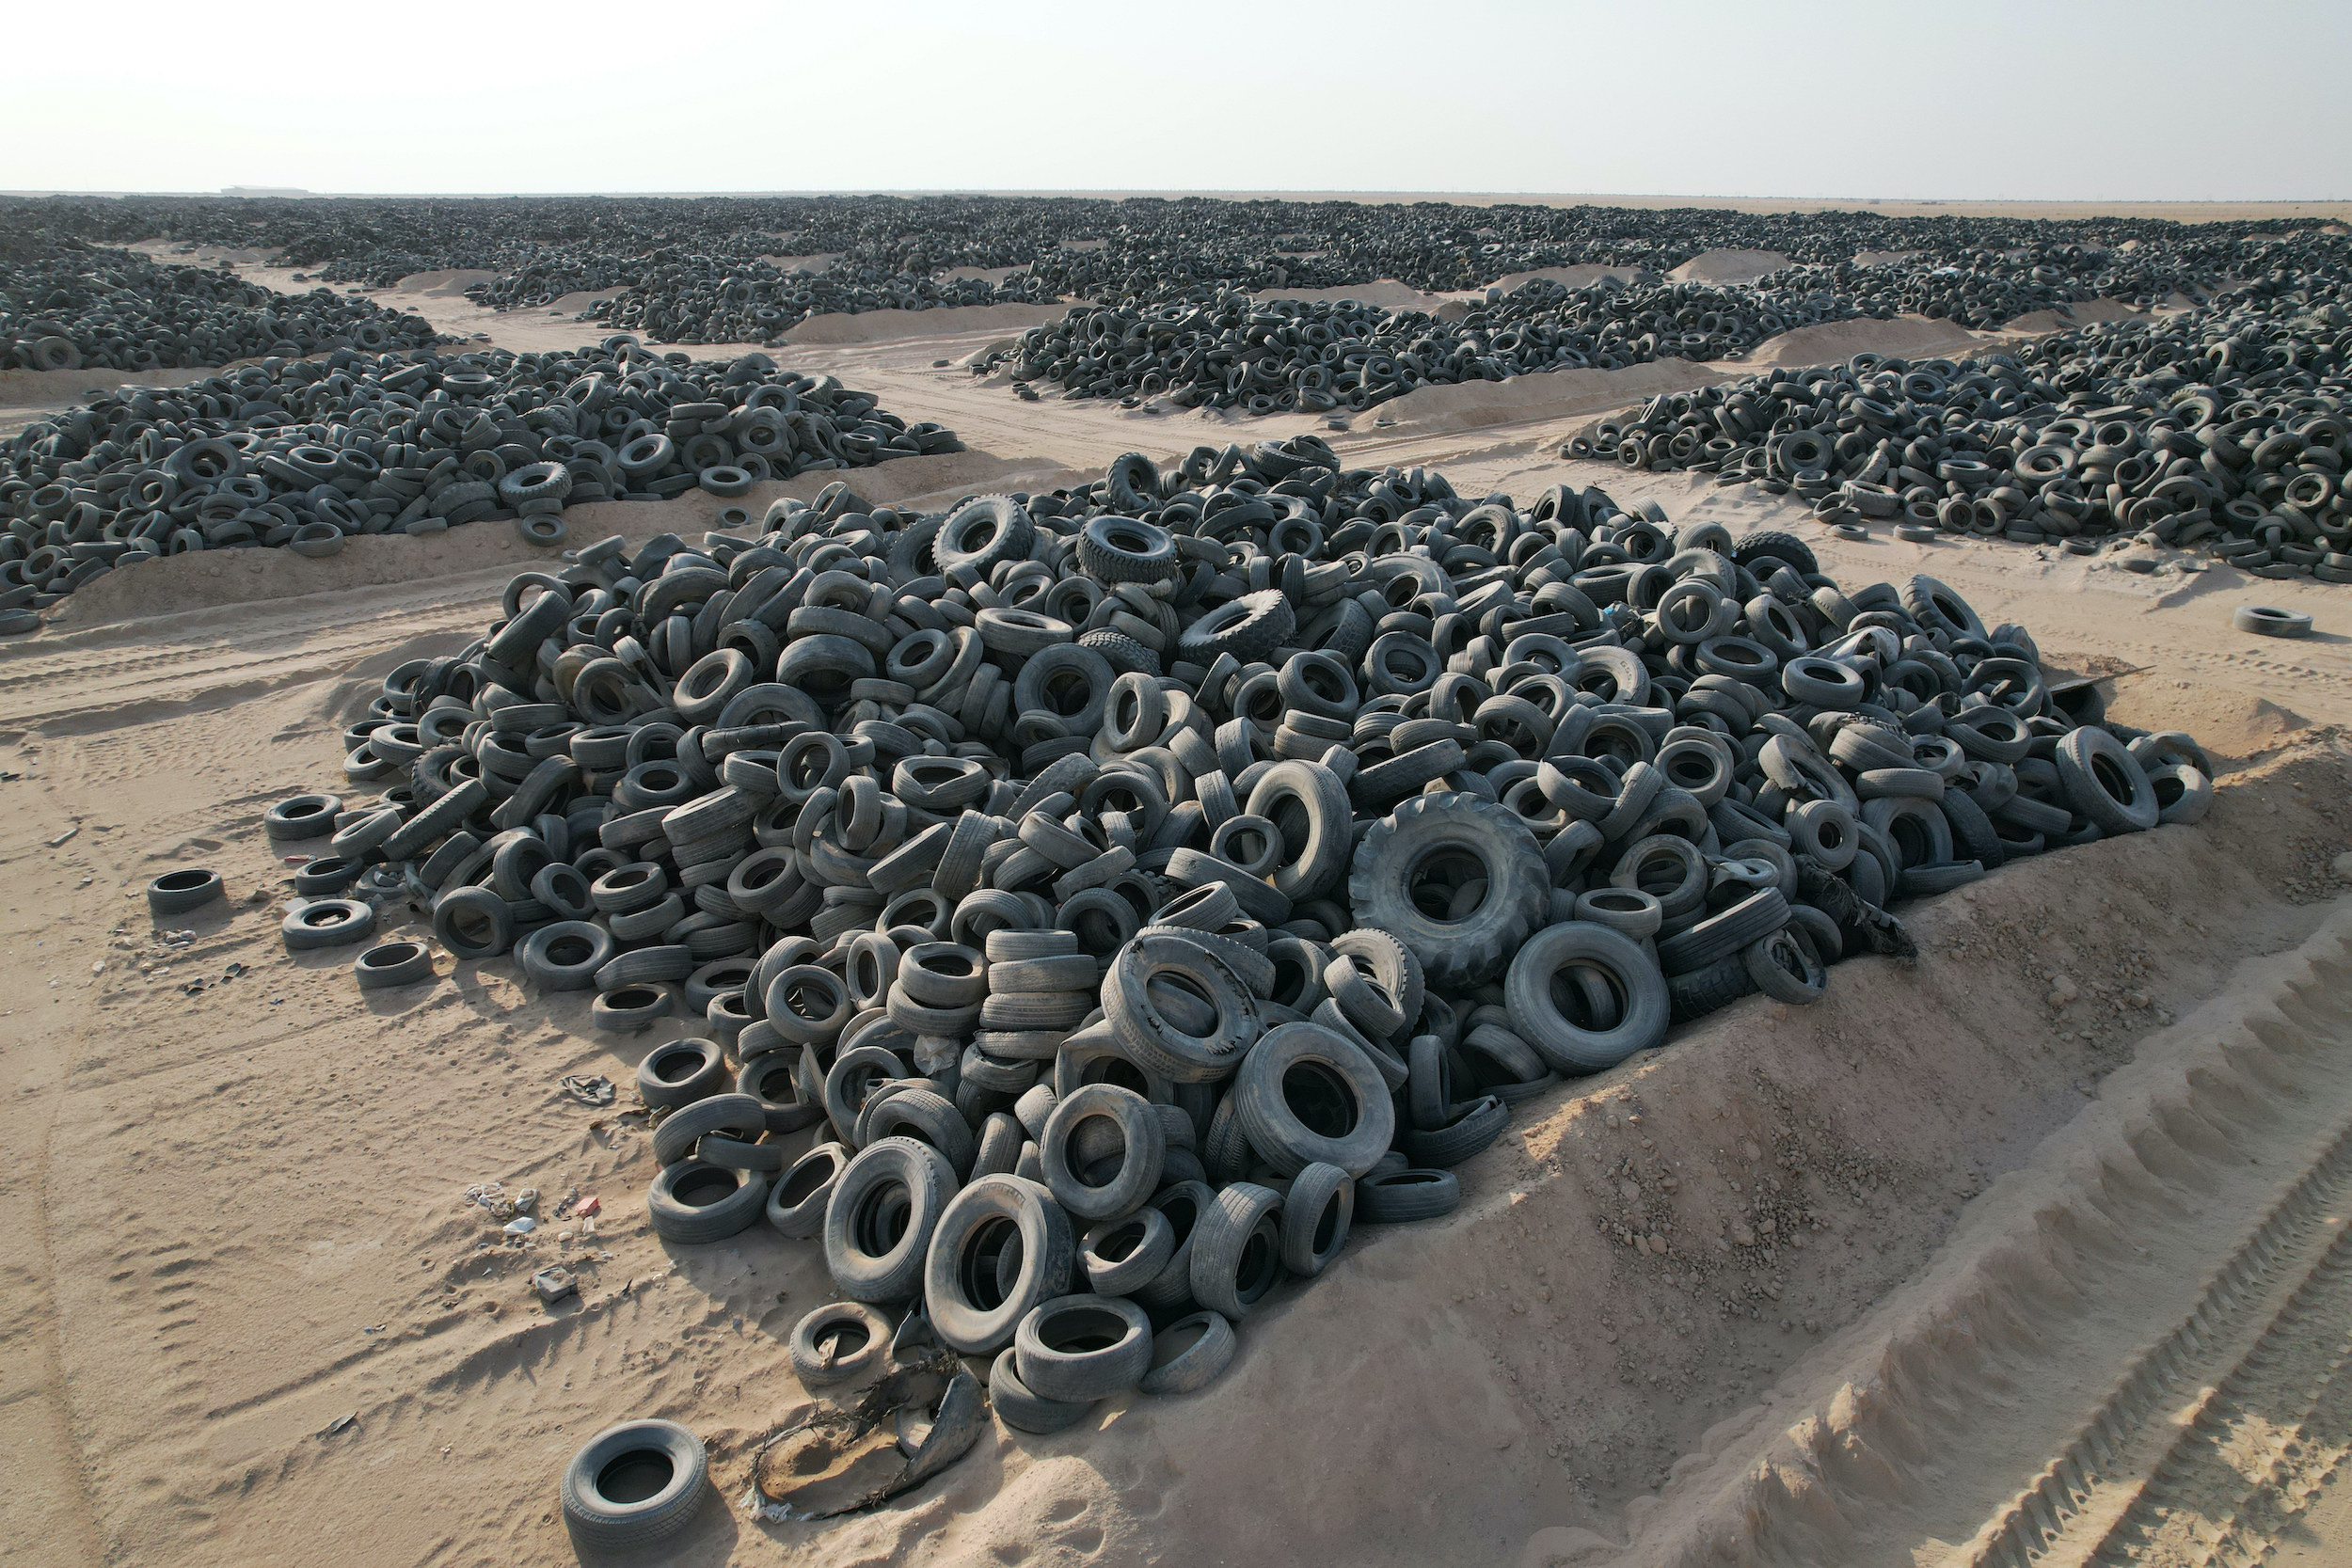 Thousands of tires sit in piles of sand in a remote area of the Middle East